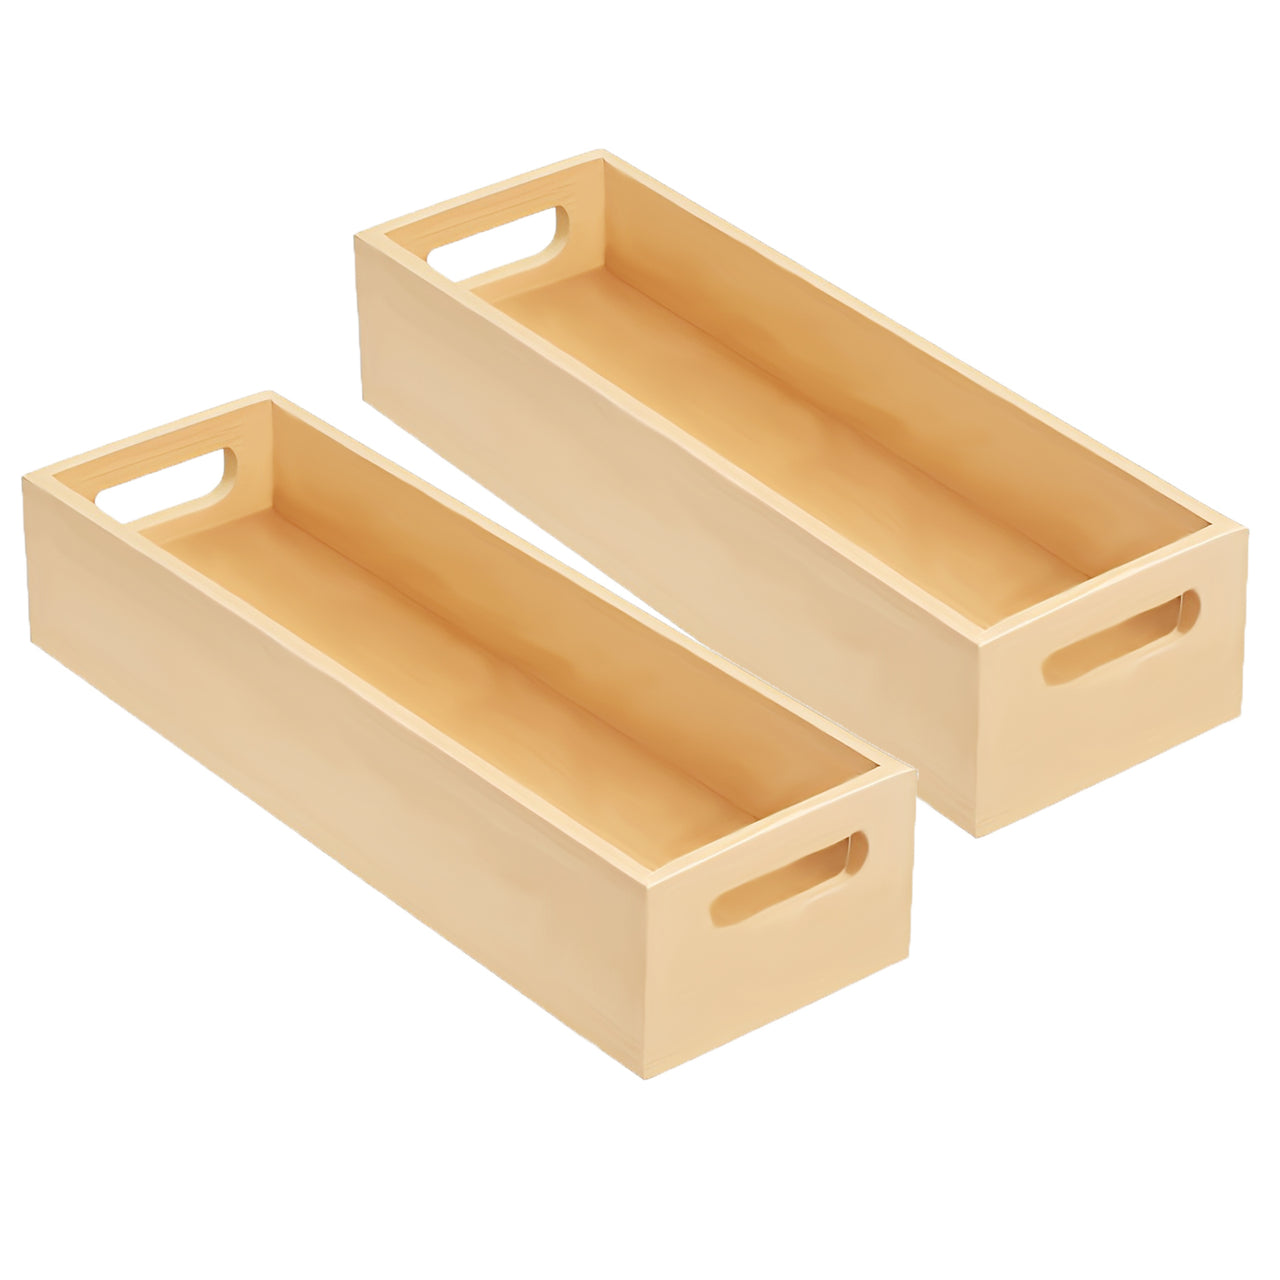 Dime Store Wooden Serving Tray Platter Multipurpose Tray | Serving Tray for Breakfast, Tea Serving, Table Décor Tray for Storage, Great Gift as Table Decor or Kitchen Decor (Set of 2, Natural) Dime Store